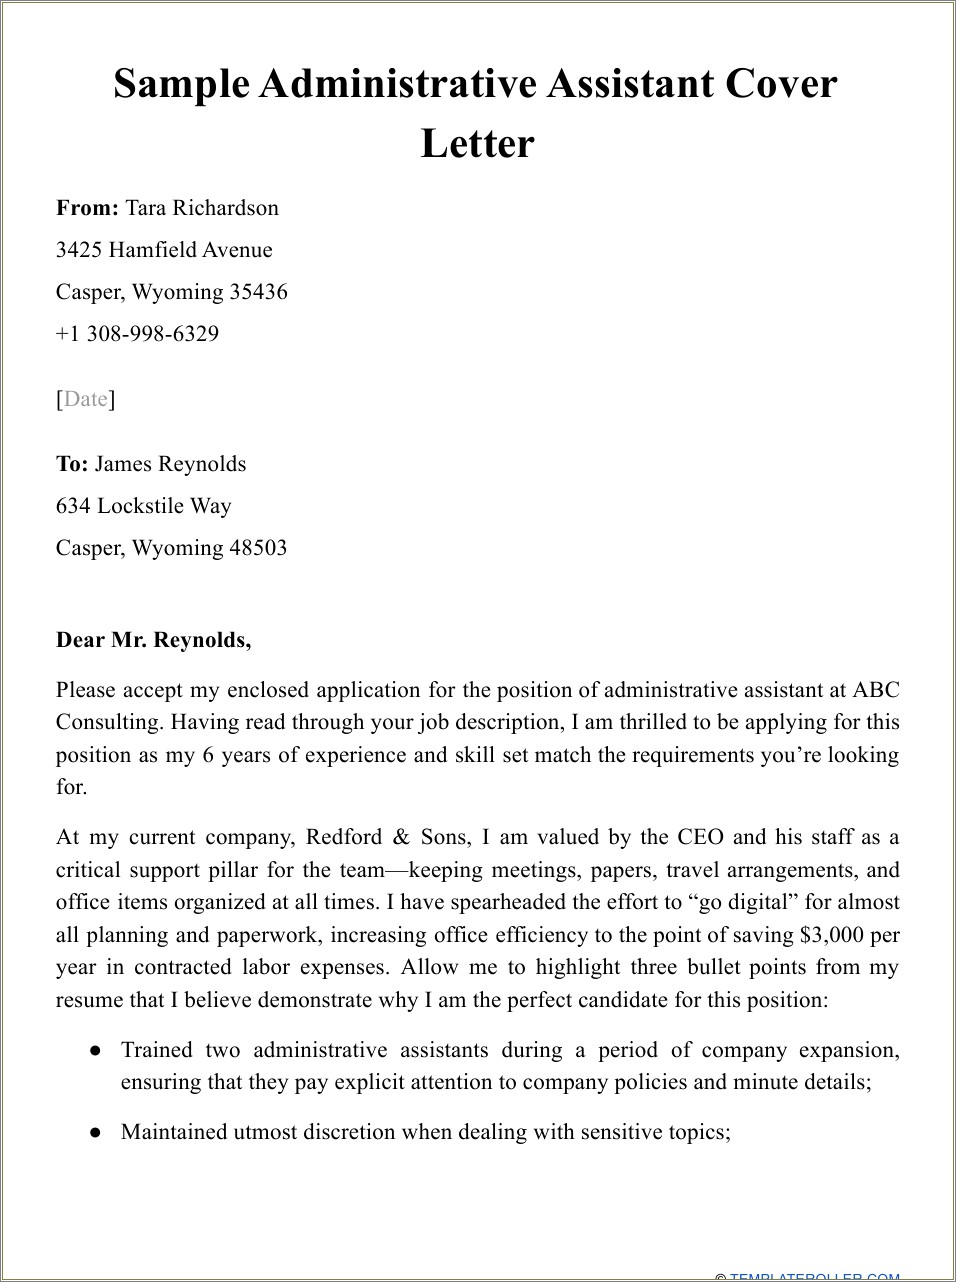 Resume Cover Letter Administrative Assistant Position